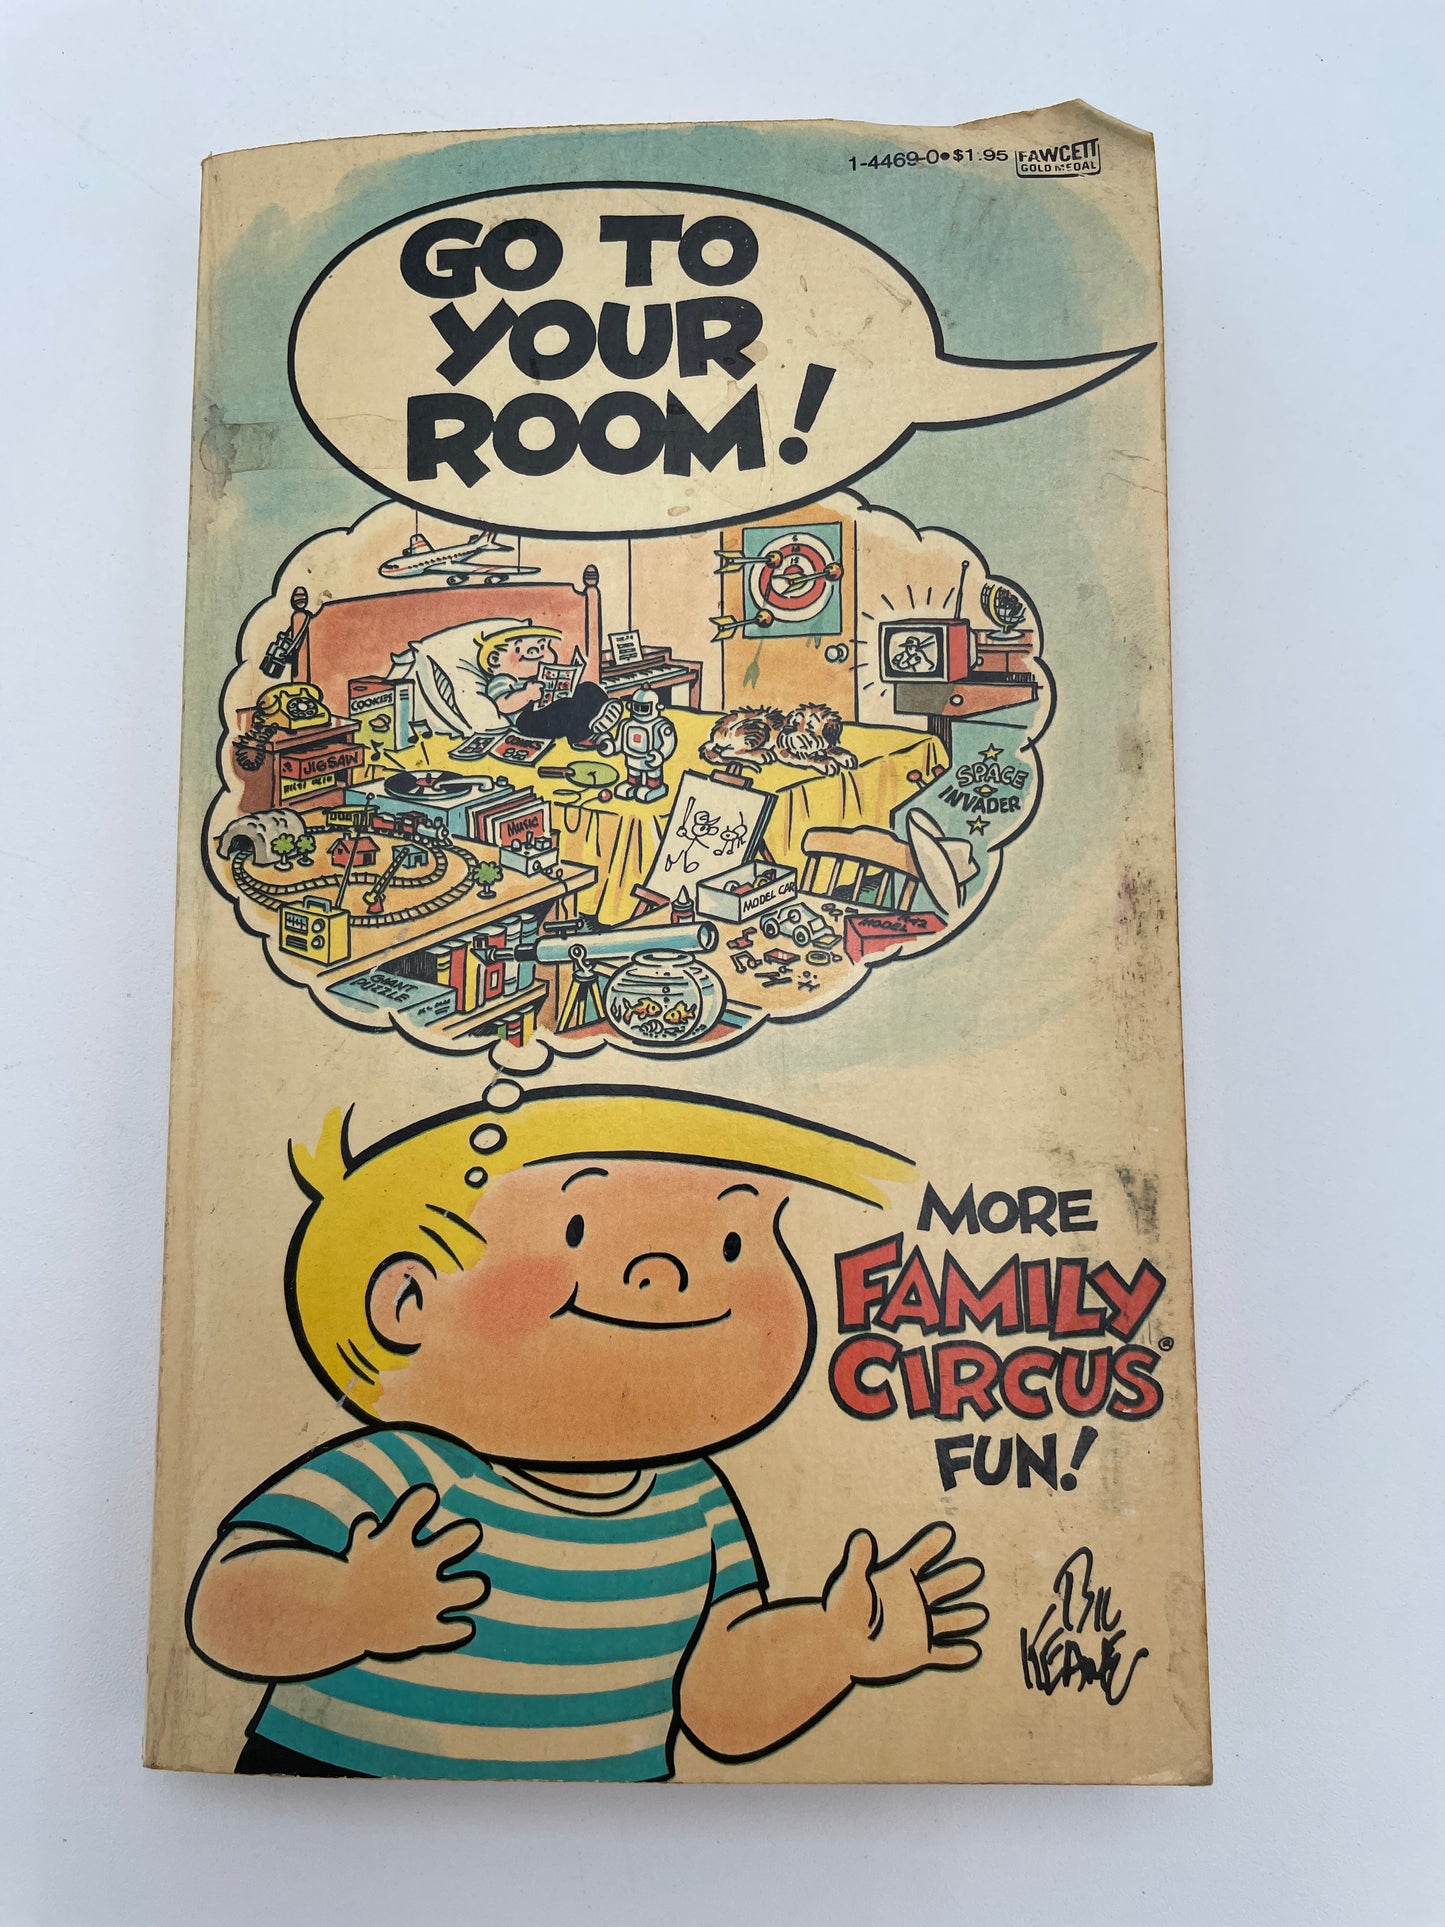 Family Circus Comic Book - Go to Your Room 1978 #102032